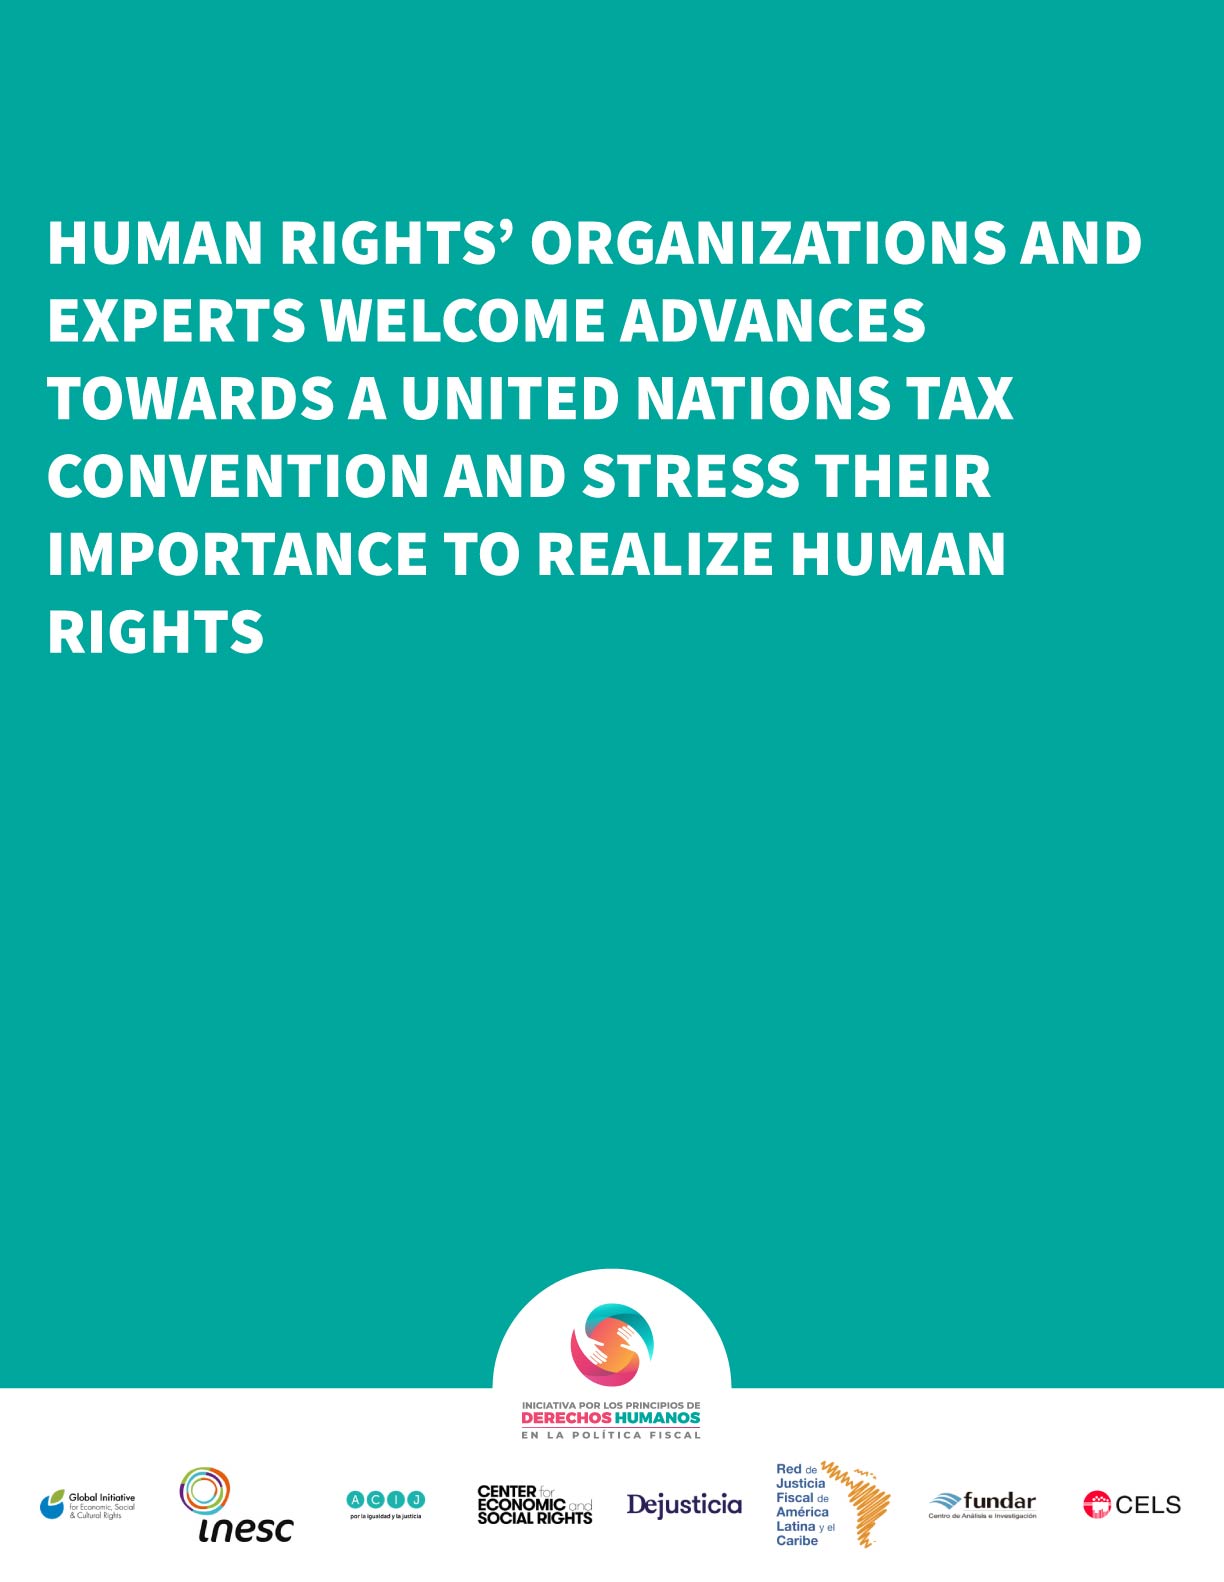 Human Rights’ organizations and experts welcome advances towards a United Nations Tax Convention and stress their importance to realize human rights